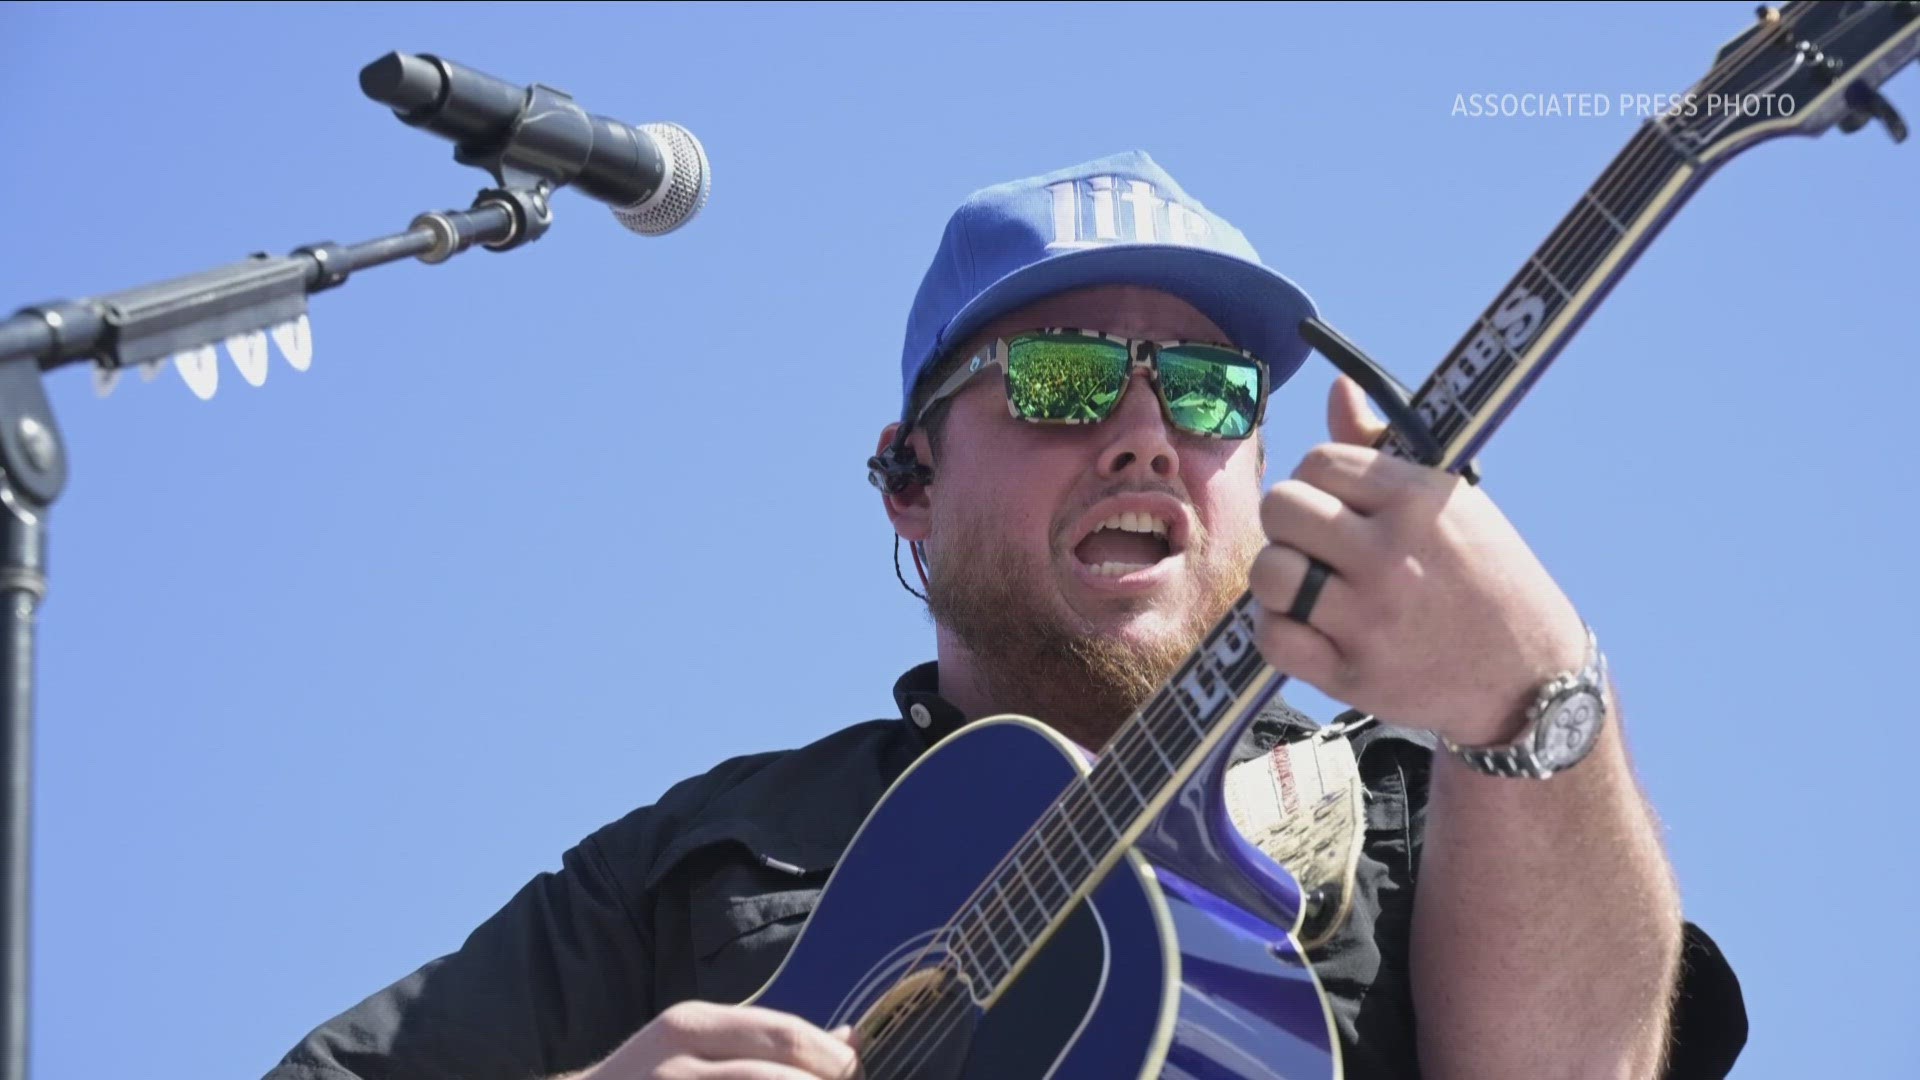 Luke Combs will be playing back-to-back nights next April 19th and 20th.